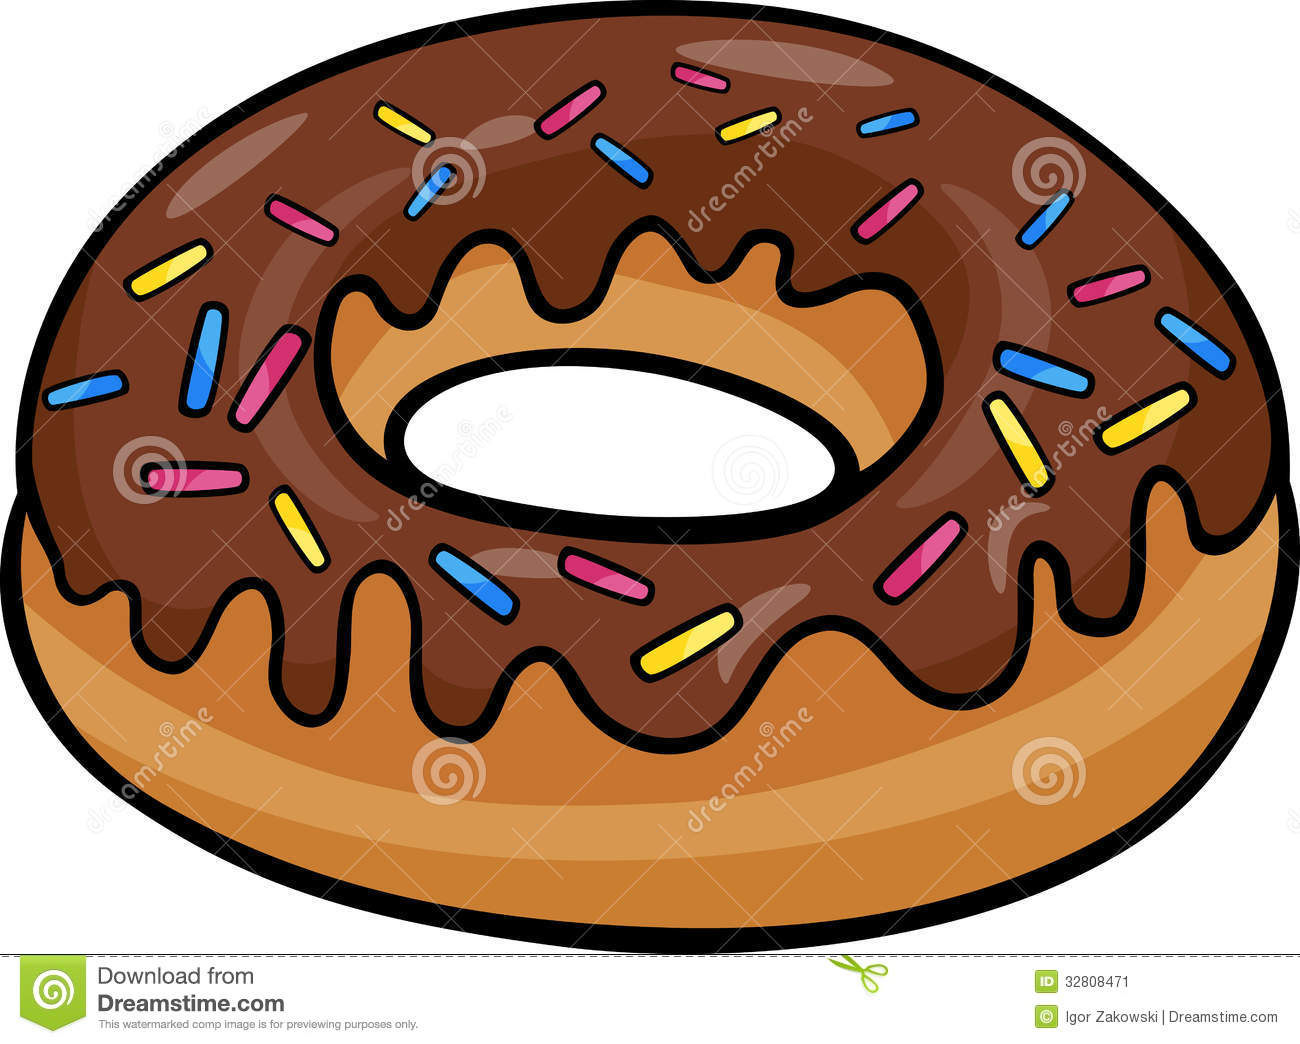 Donut clipart free